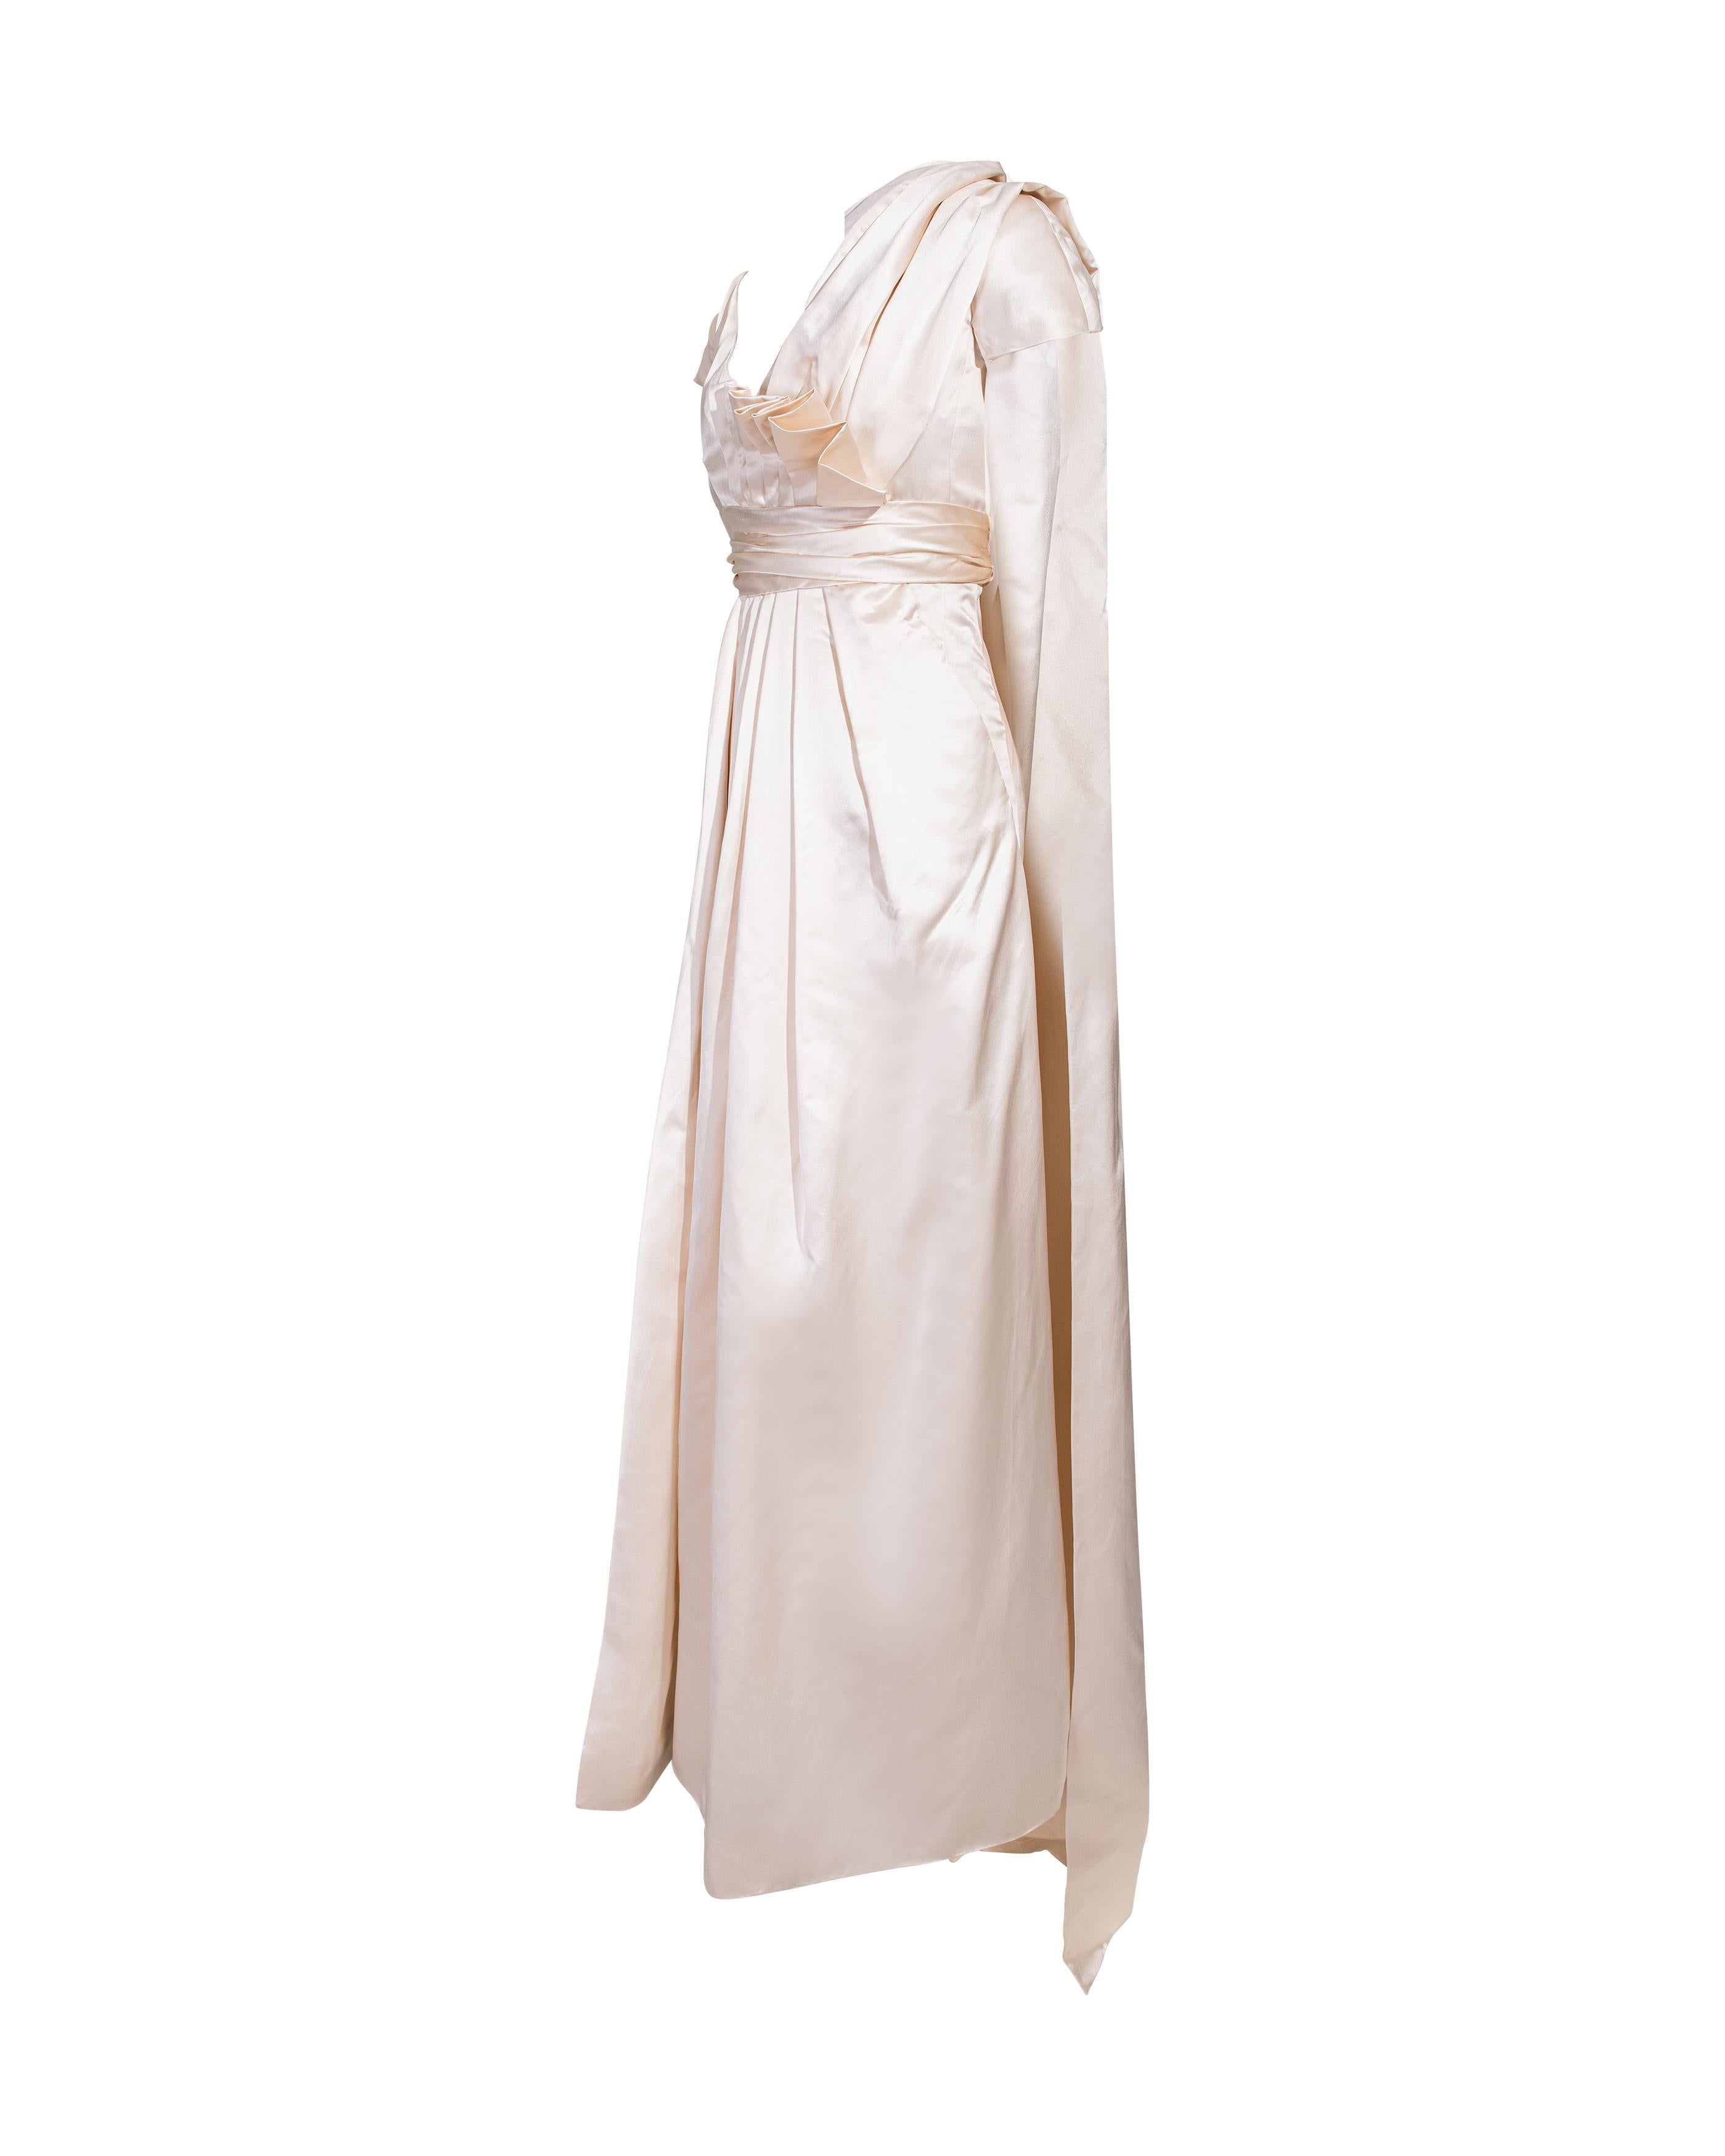 Women's S/S 1955 Christian Dior (Attributed) Short Sleeve Ecru Satin Gown with Sash